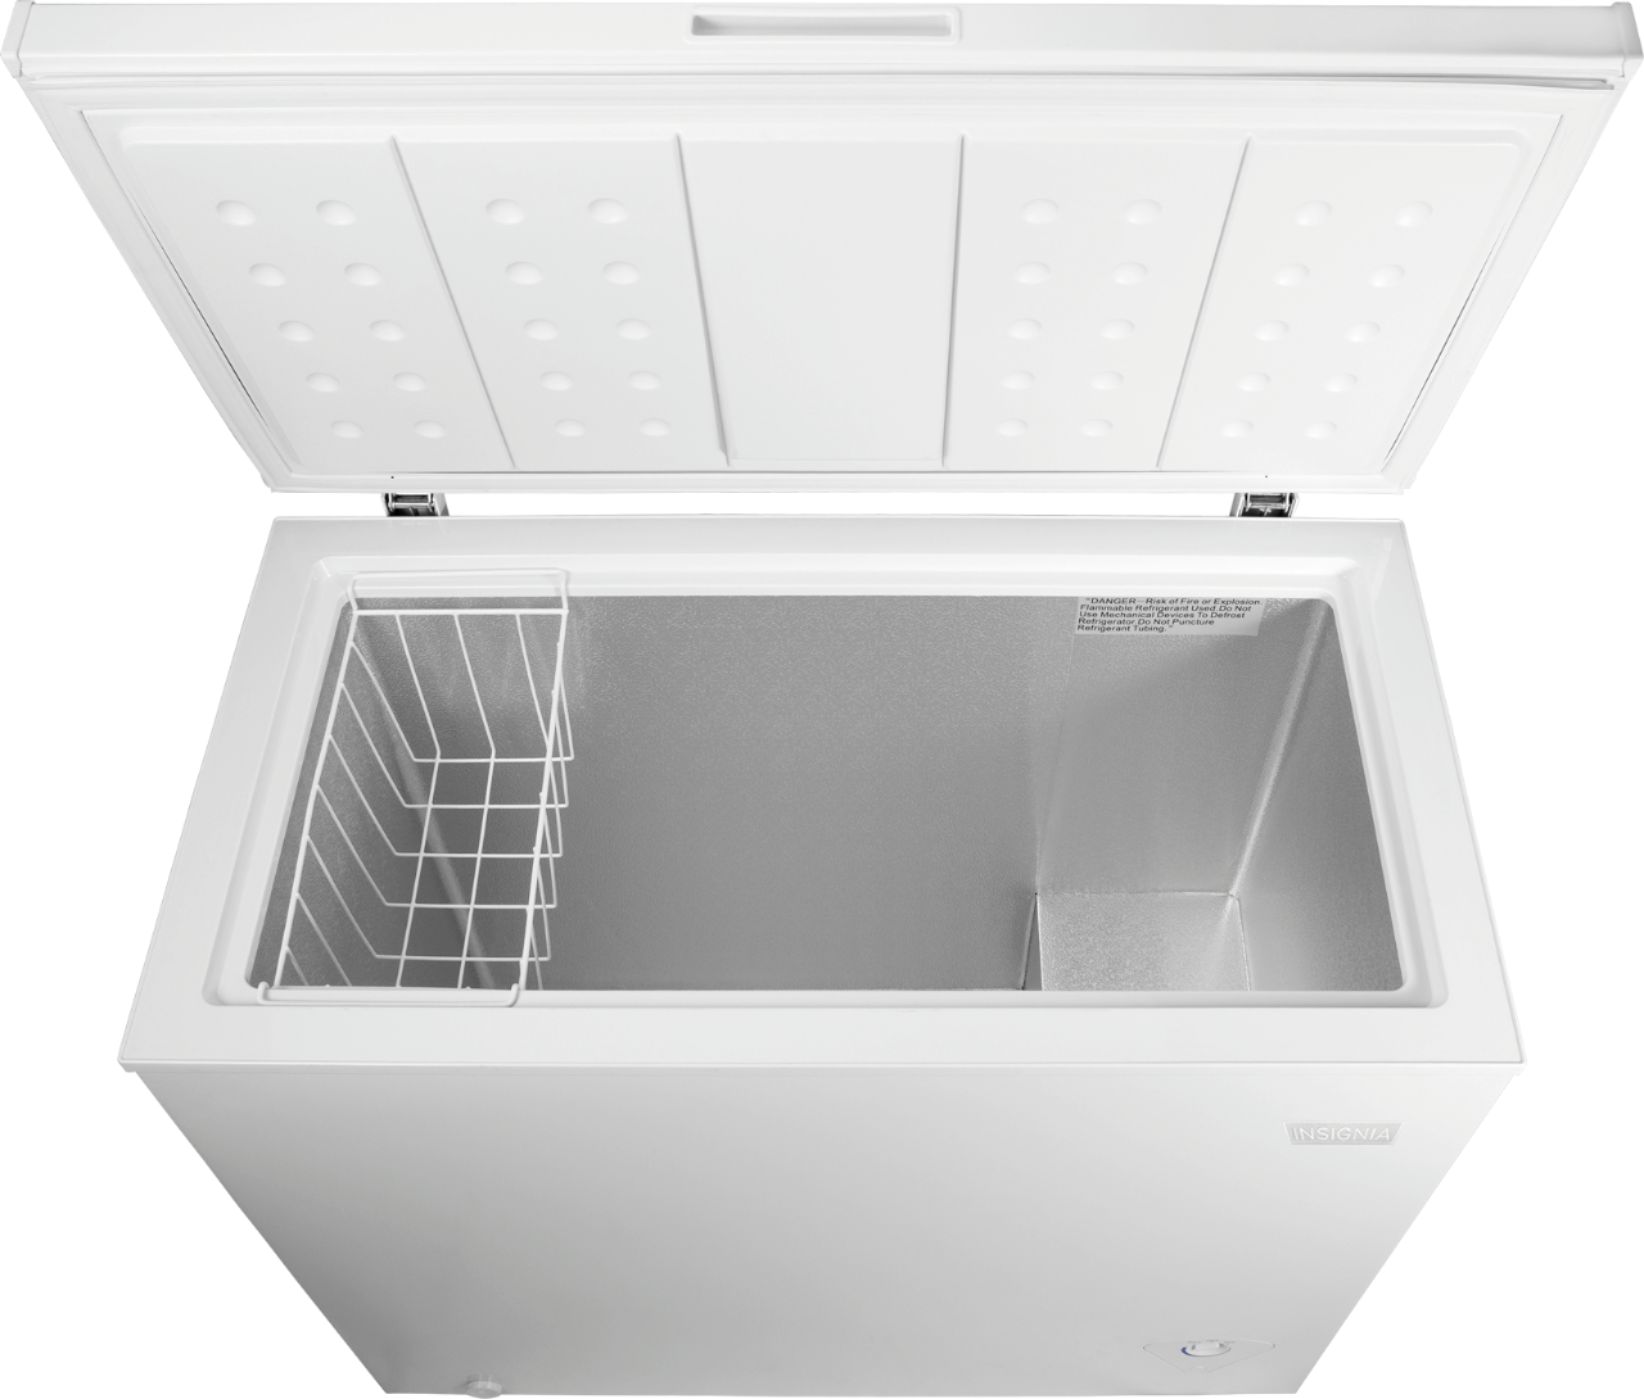 Insignia™ 10.2 Cu. Ft. Chest Freezer White NS-CZ10WH6 - Best Buy